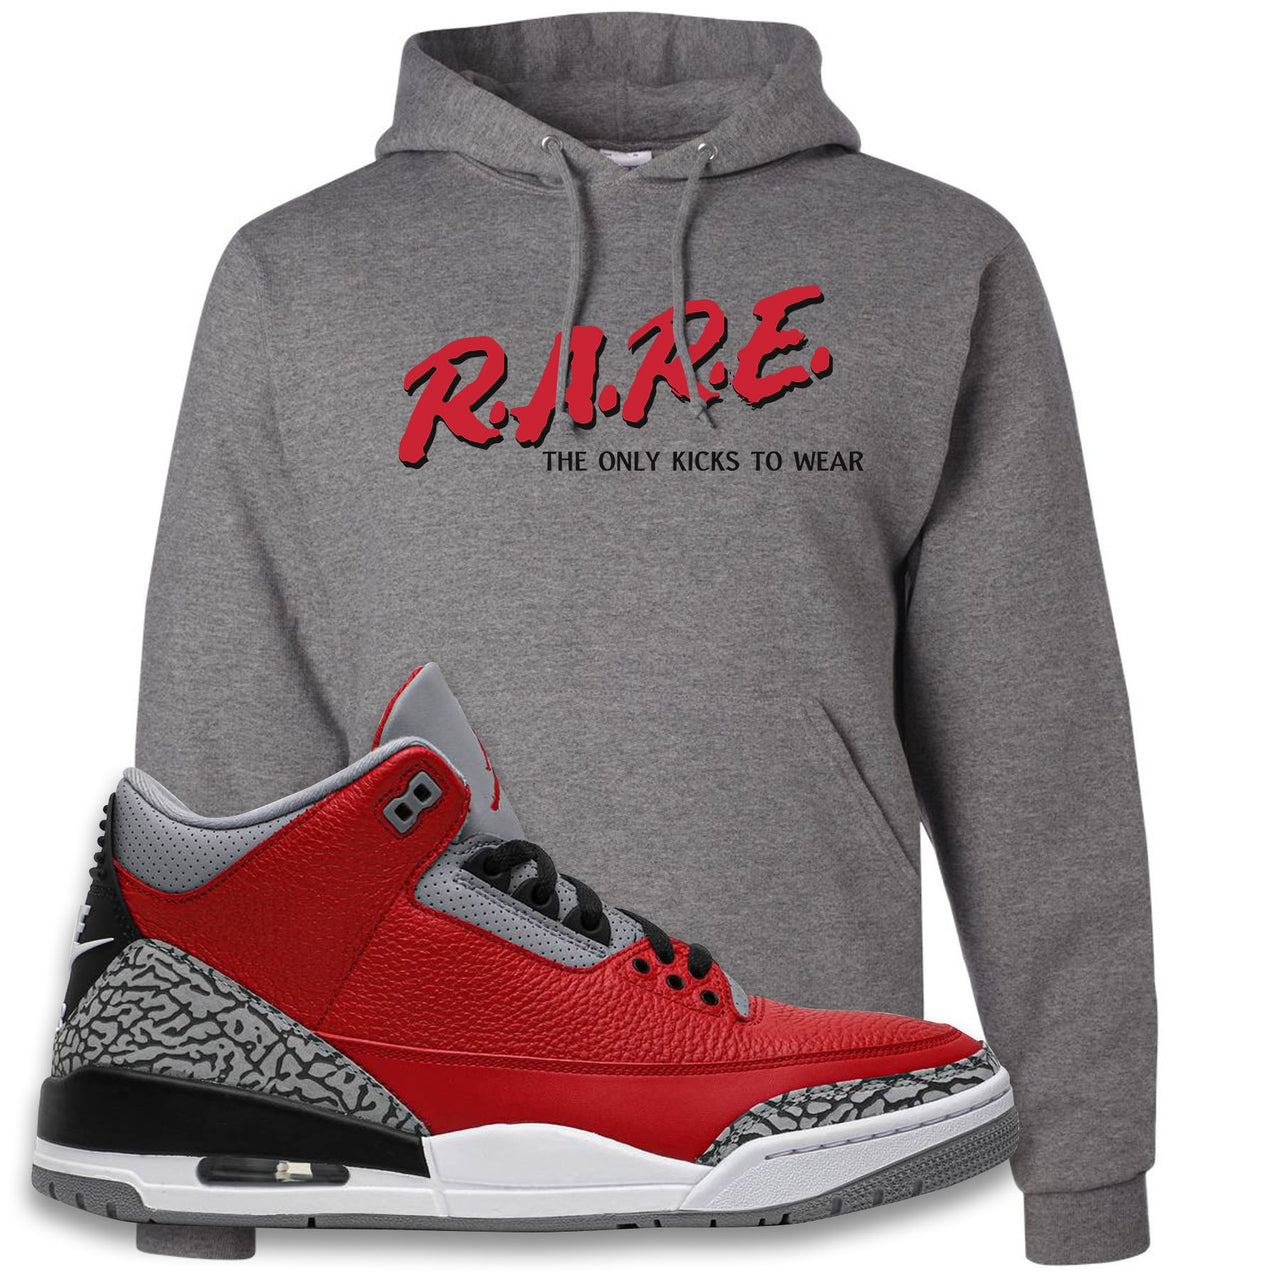 Jordan 3 Red Cement Chicago All-Star Sneaker Oxford Pullover Hoodie | Hoodie to match Jordan 3 All Star Red Cement Shoes | Rare